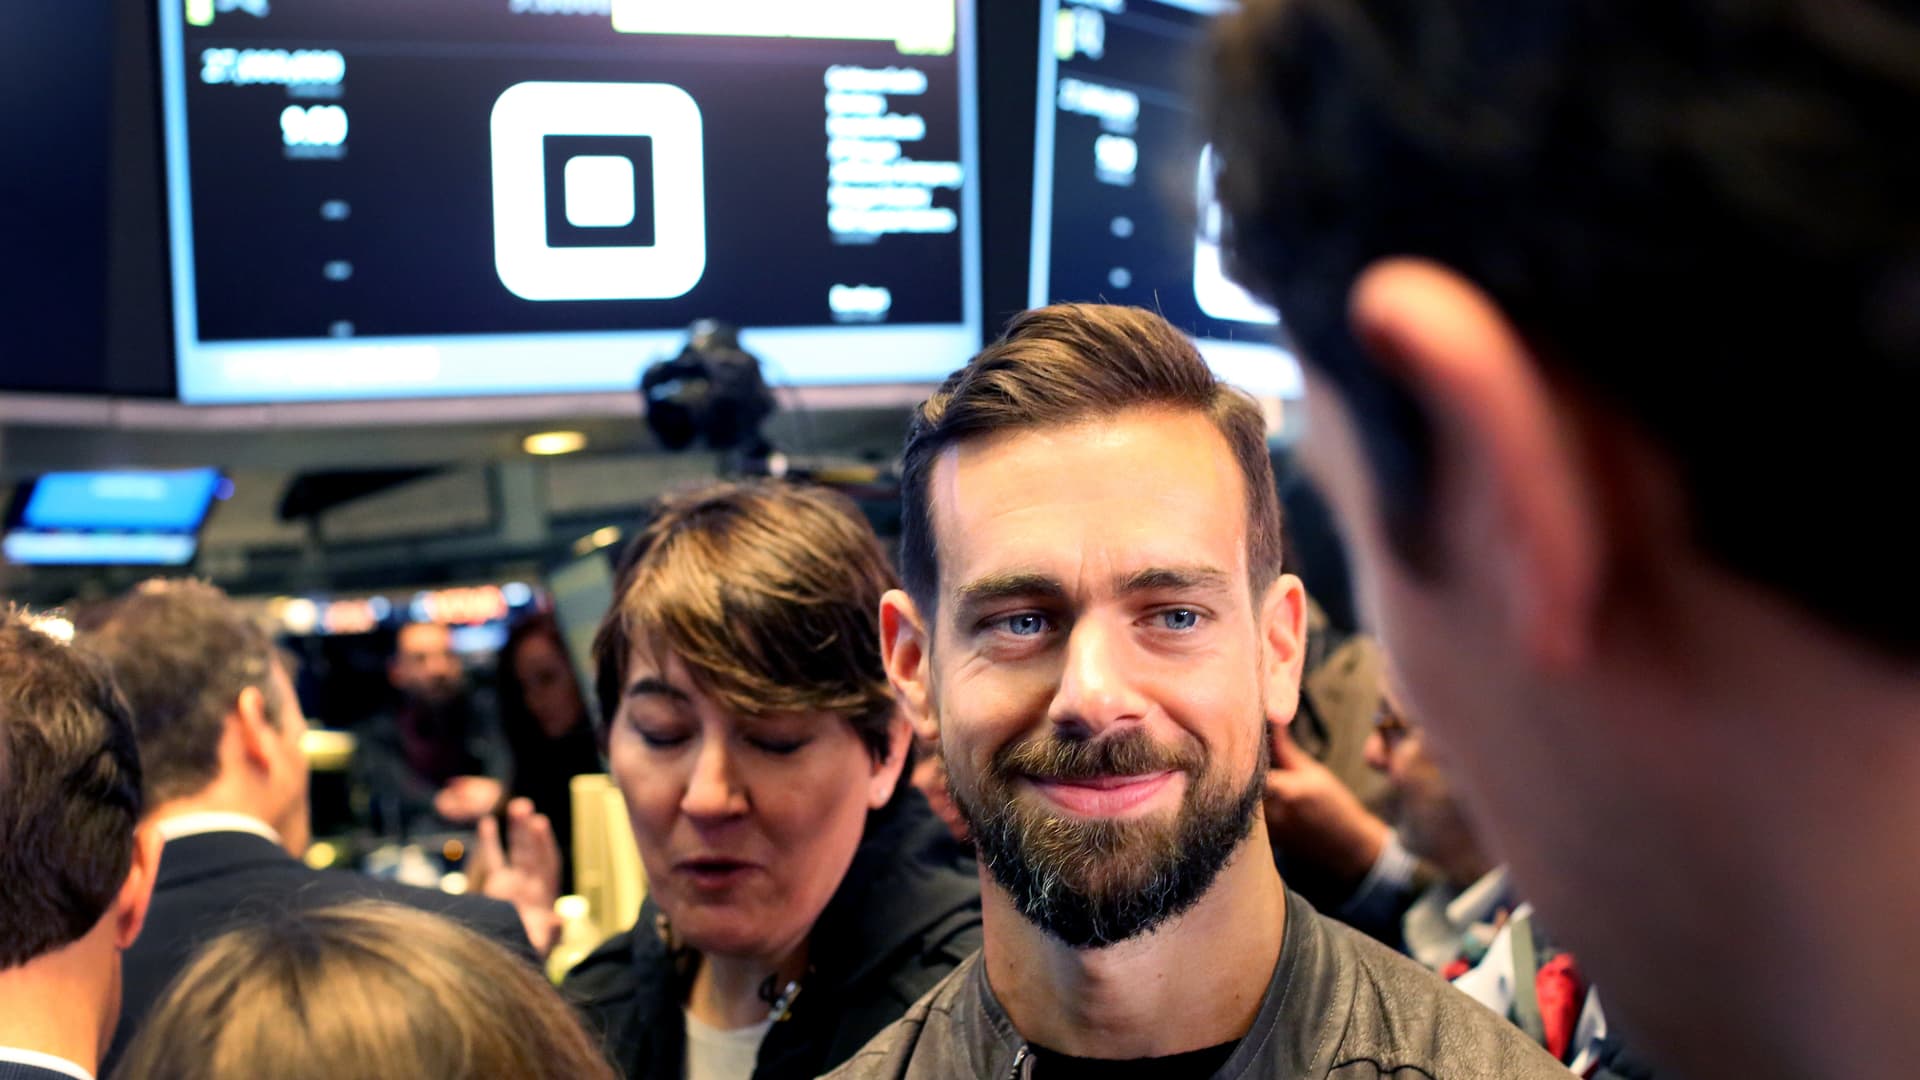 Jack Dorsey, chief executive officer of Square Inc., second right, tours the floor of the New York Stock Exchange (NYSE) in New York, U.S., on Thursday, Nov. 19, 2015.